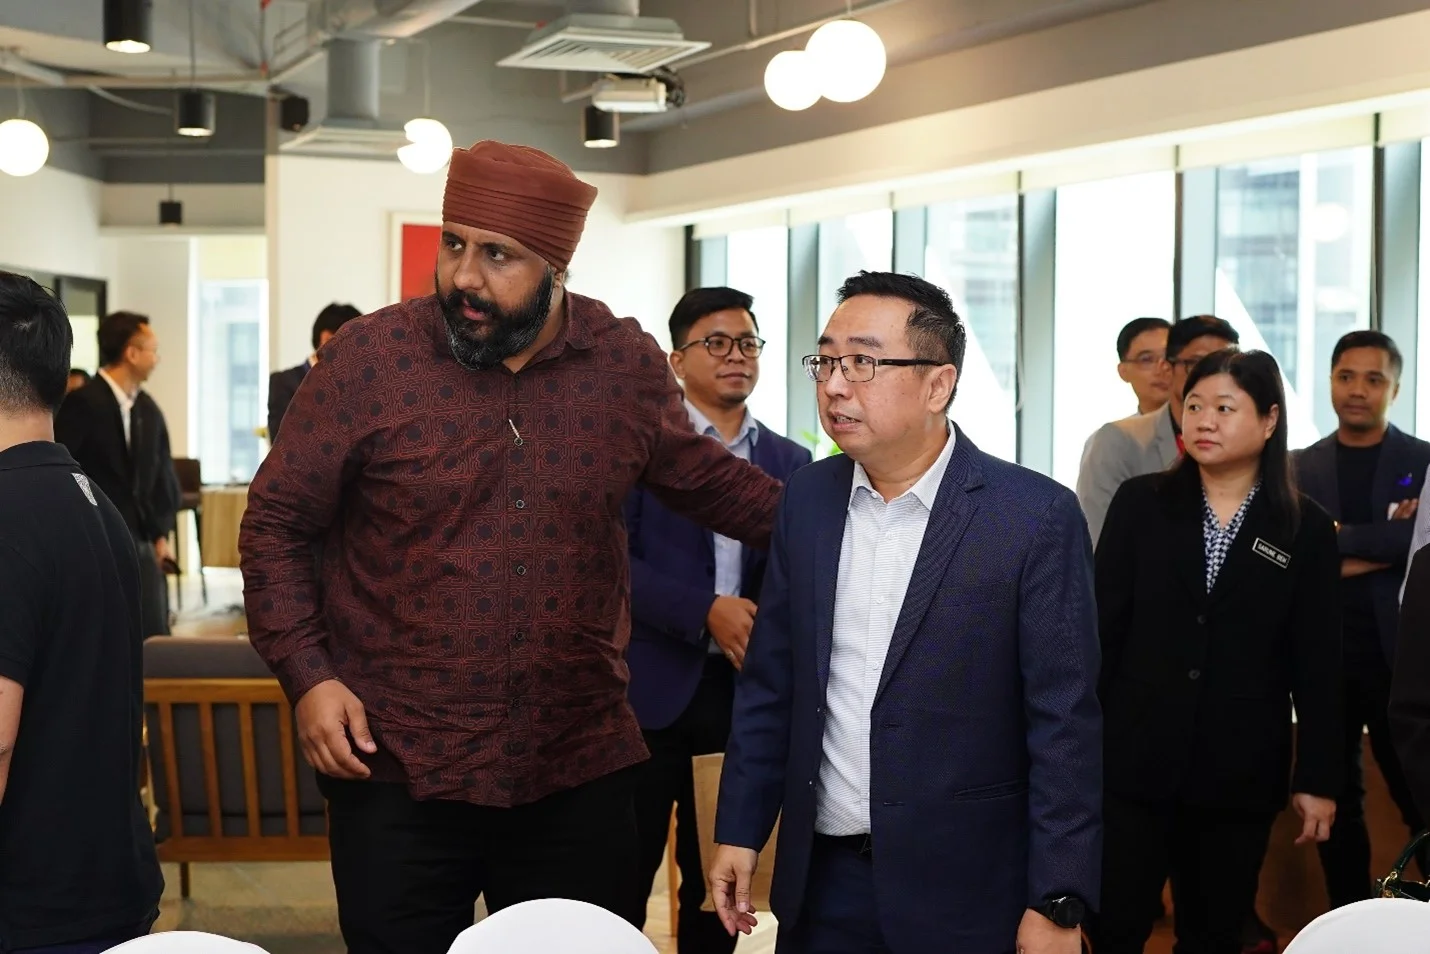 MAVCAP’s CIO, Paramjit Singh with YB Chang Lih Kang, Minister of Science and Technology